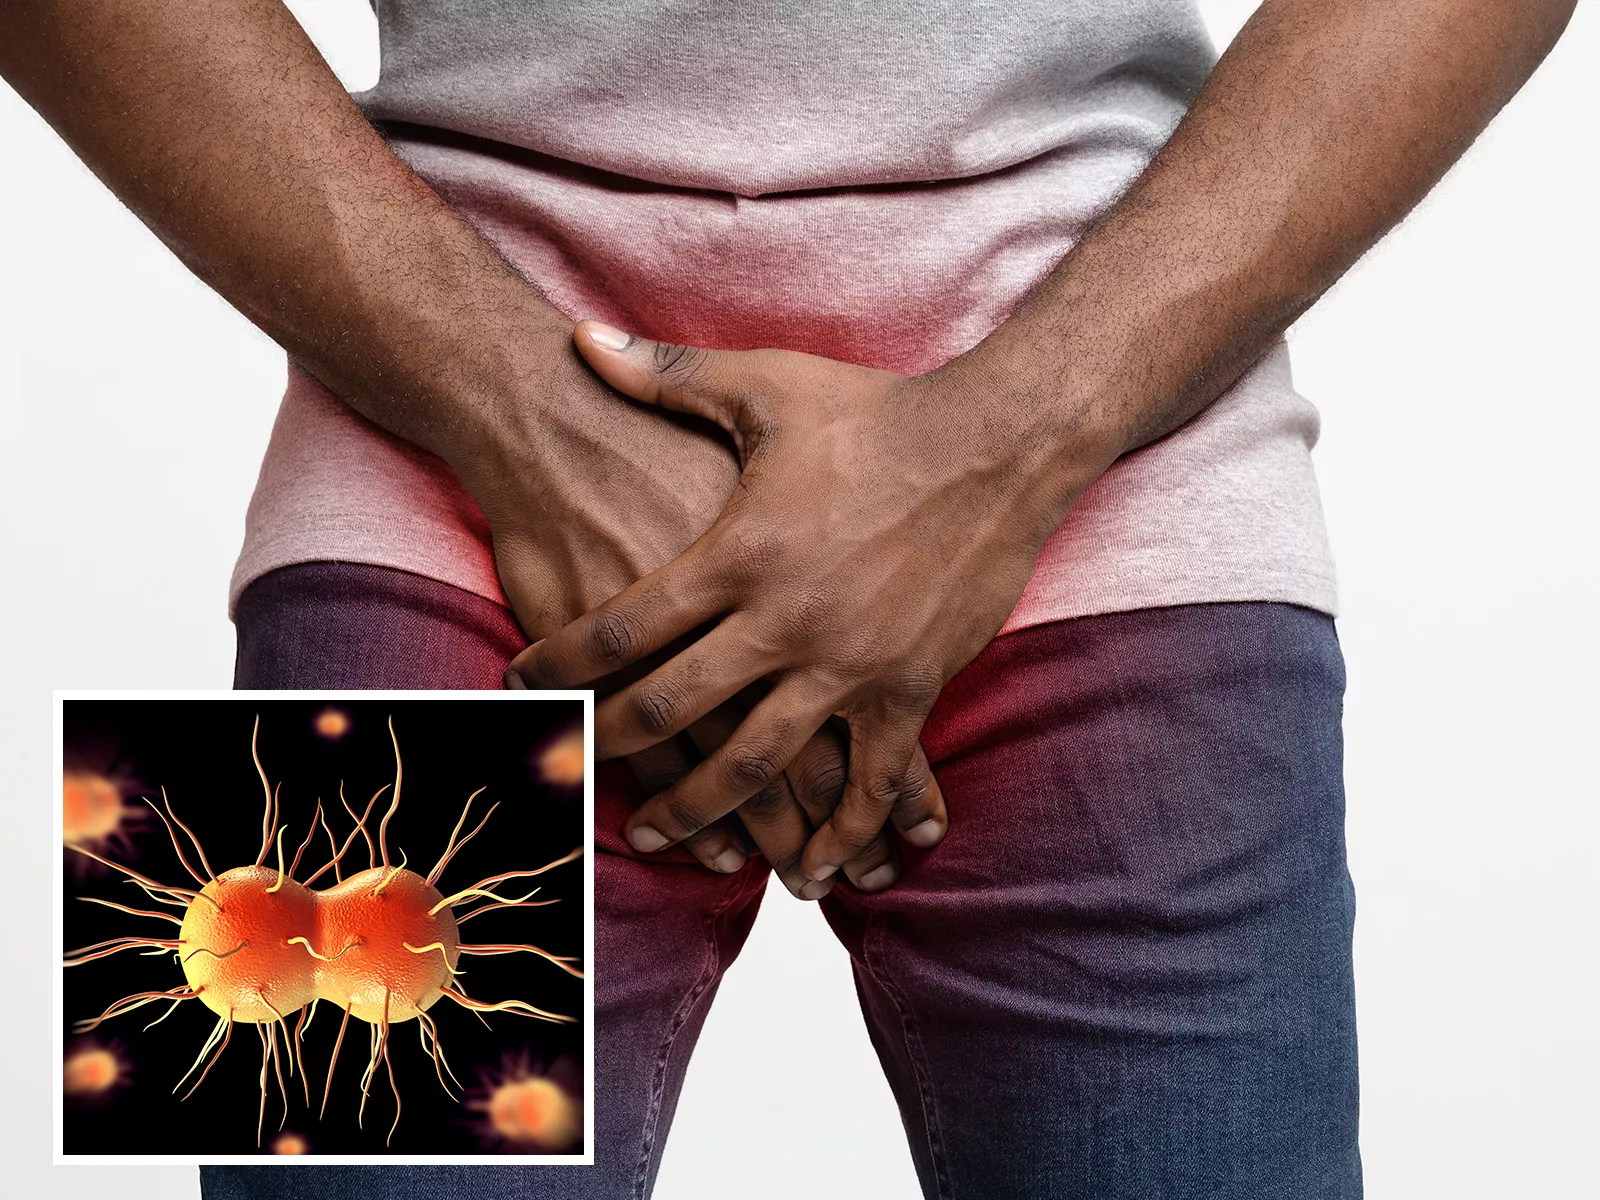 Man Gets Extreme, Super-Gonorrhea after Unprotected Sex with Prostitute pic